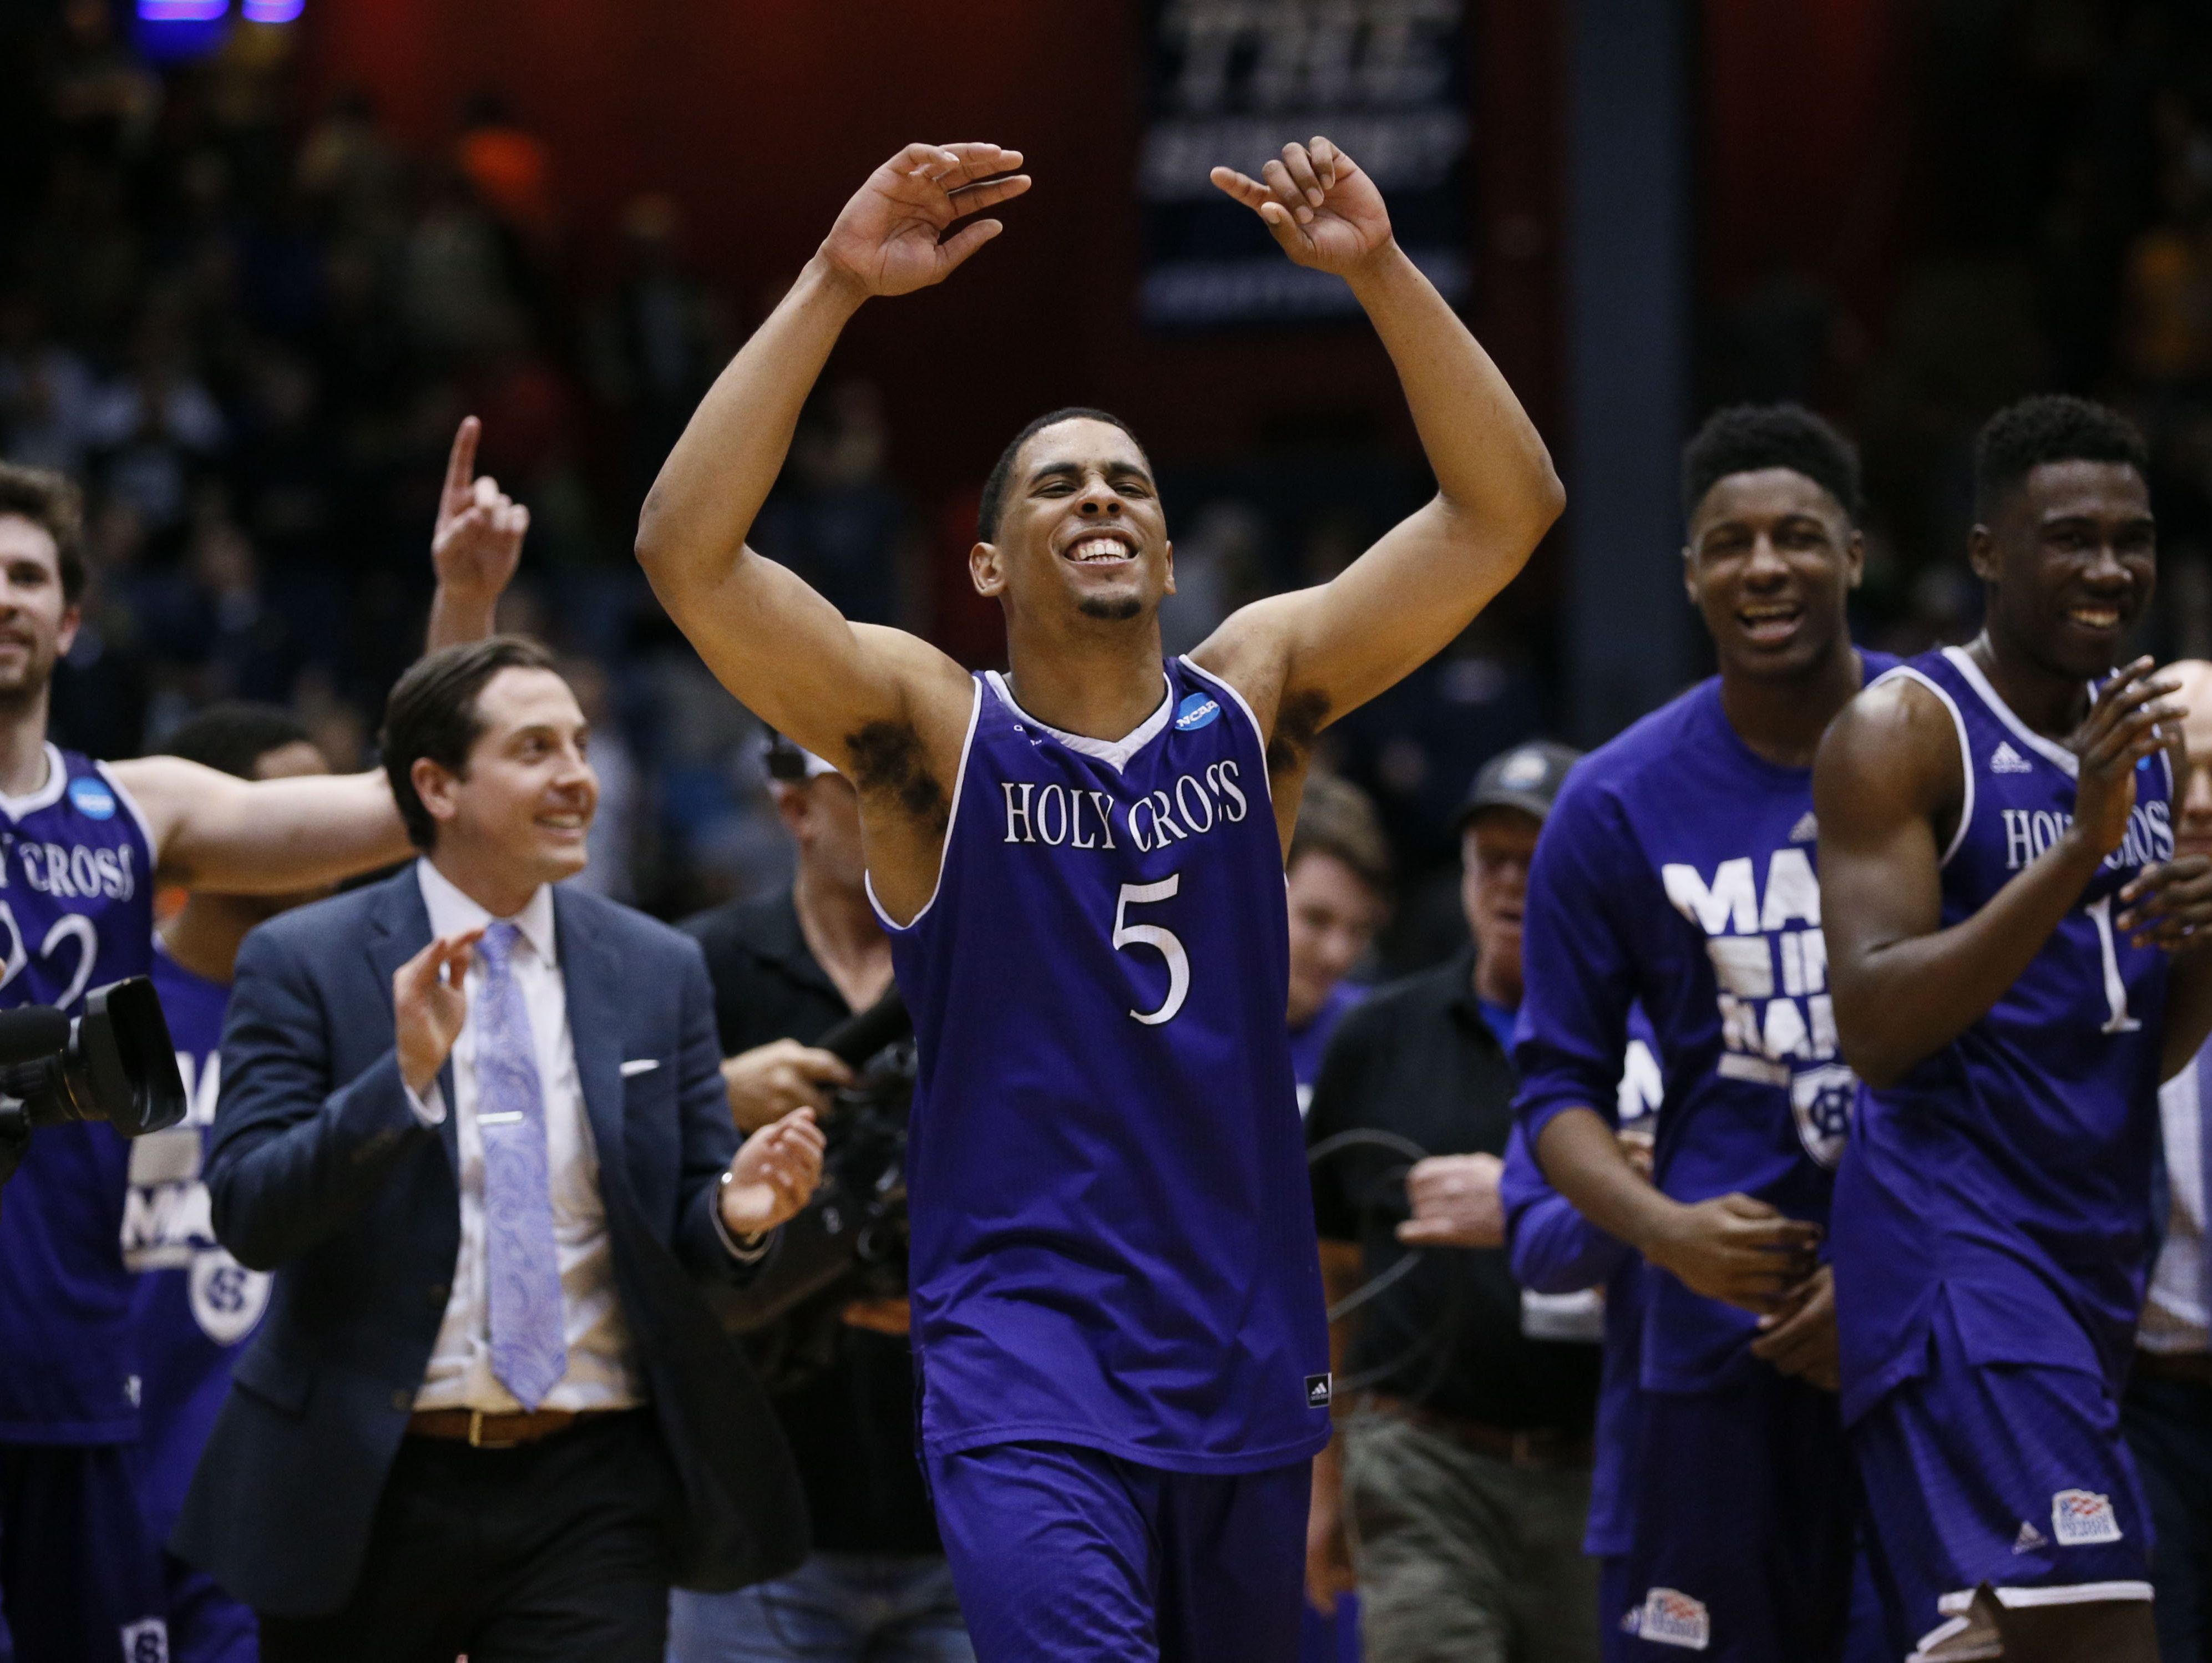 Holy Cross tops Southern for first NCAA win in 63 years USA TODAY Sports